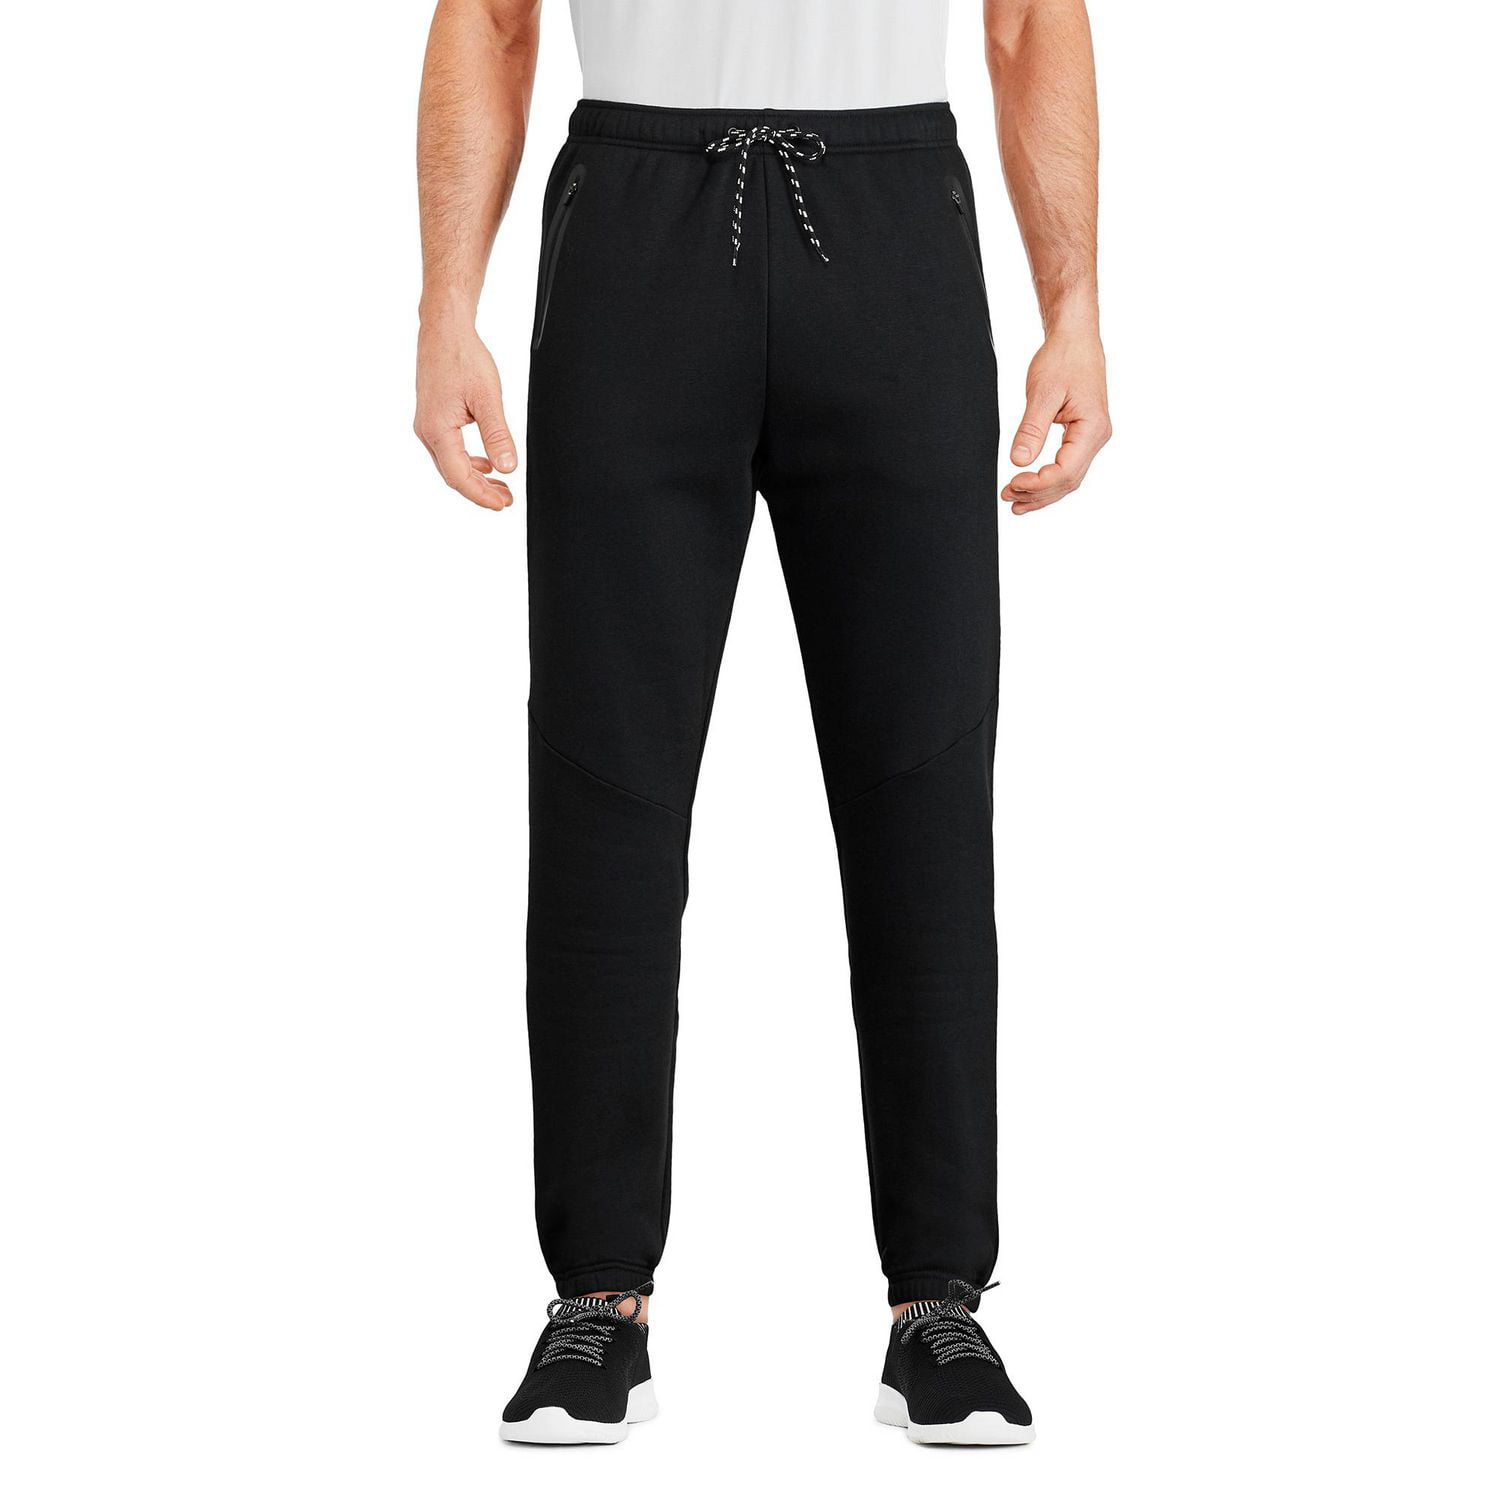 The Universal Works Trouser Fit Guide.  Universal works, Mens workout pants,  Trousers